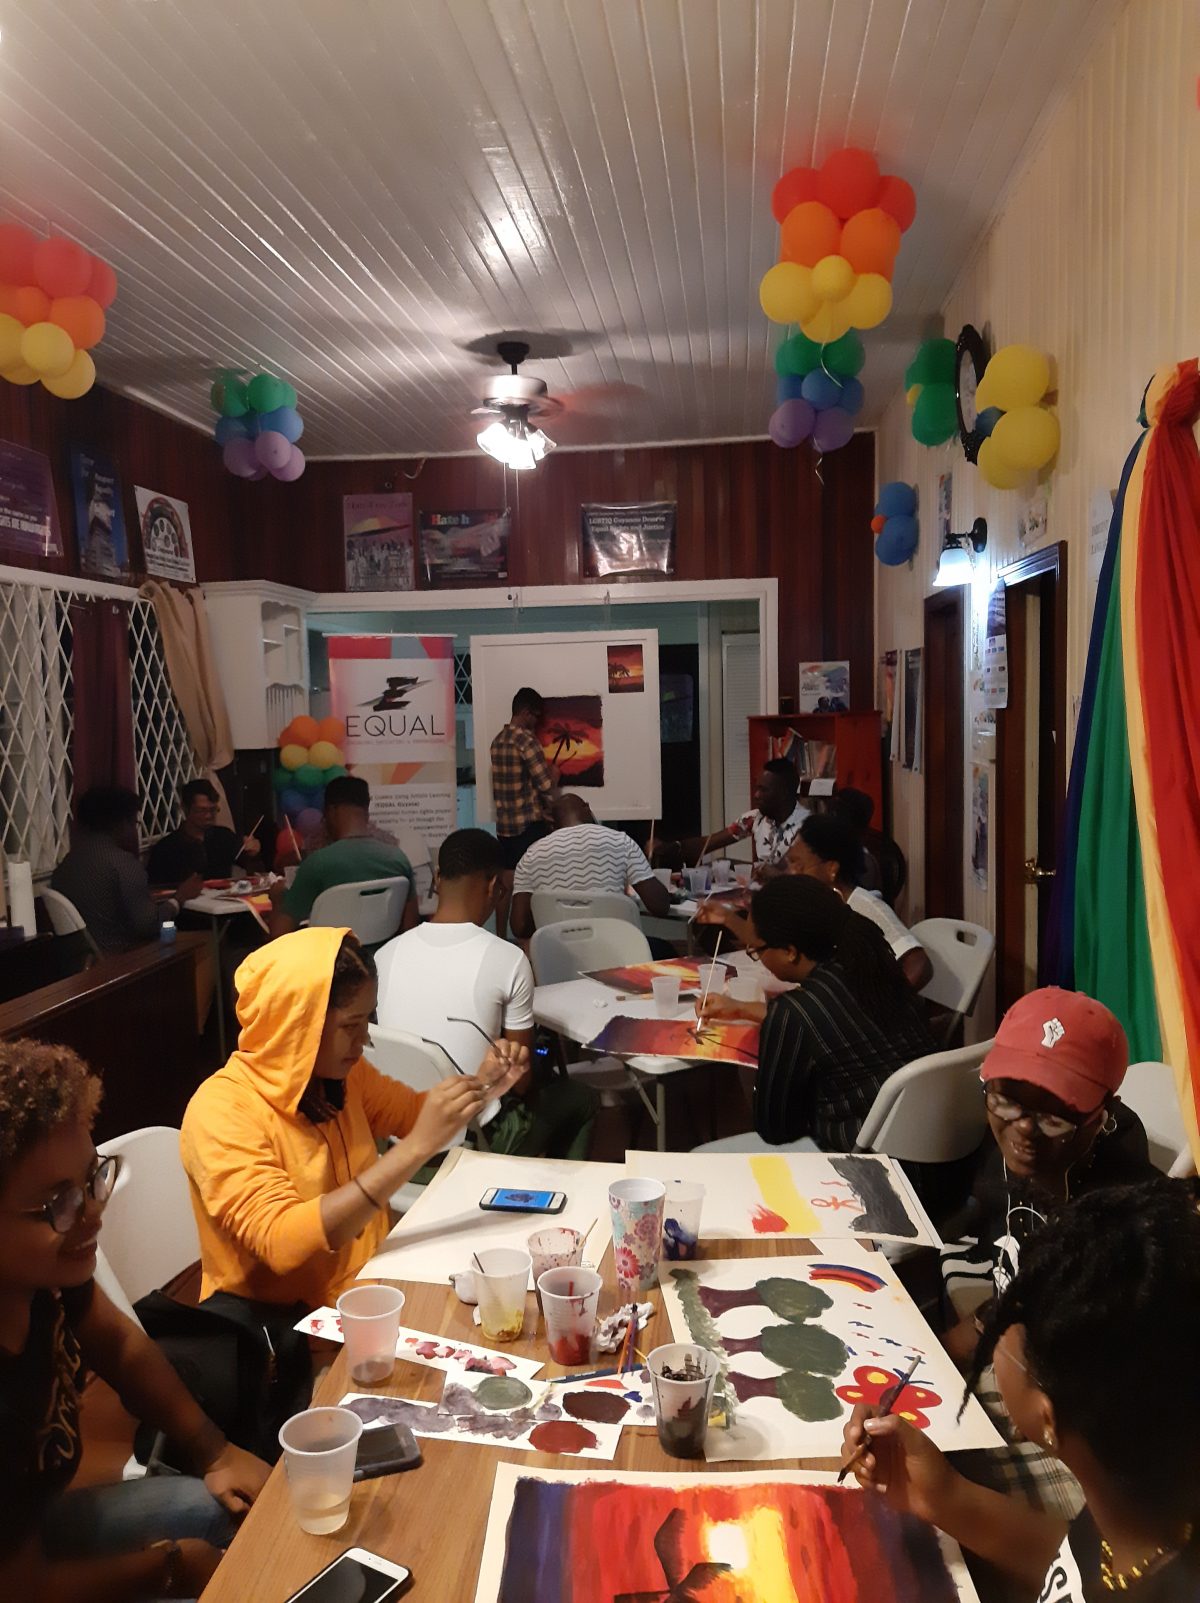 EQUAL Guyana hosting one of its signature Art Splash activities, providing a safe space for youth to engage and explore the arts to promote self-care and healthy expression.
